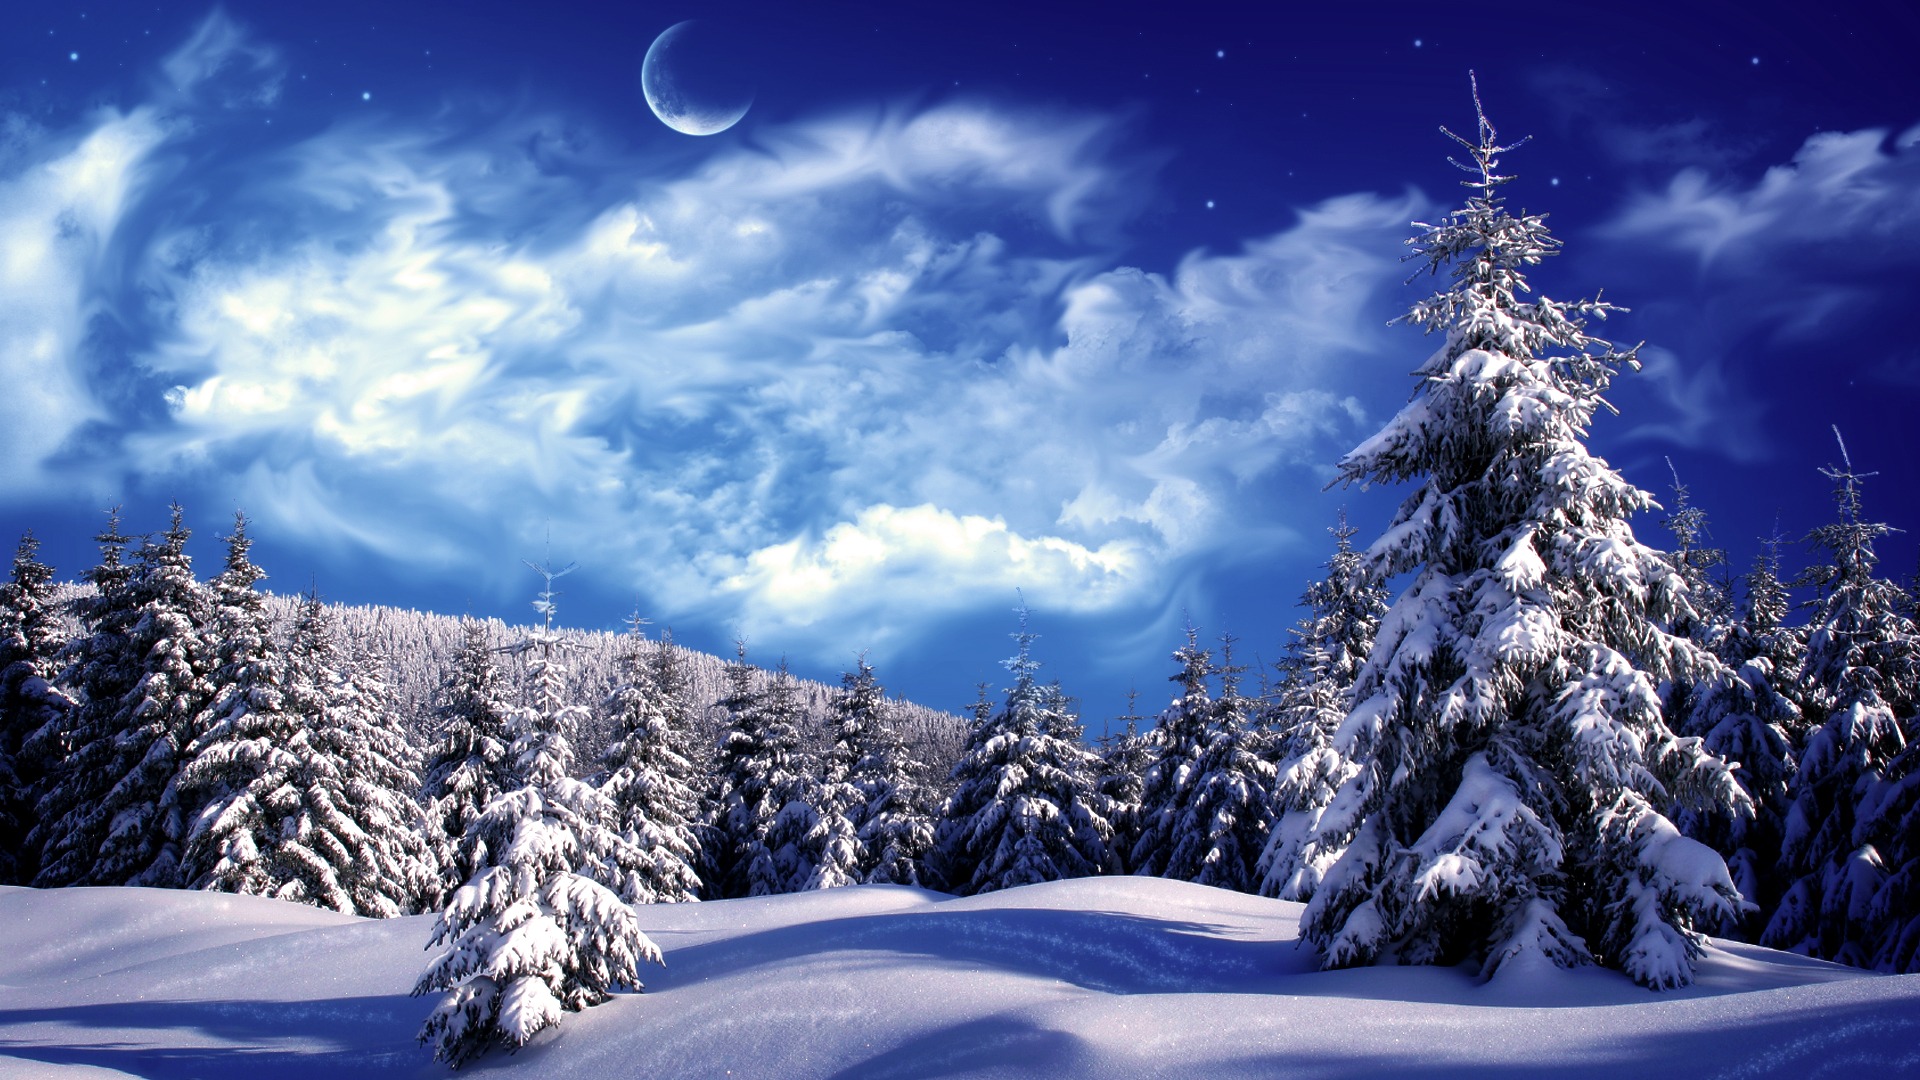 Cloud And Supermoon In Sky Looking For Snow Field Winter Wallpaper